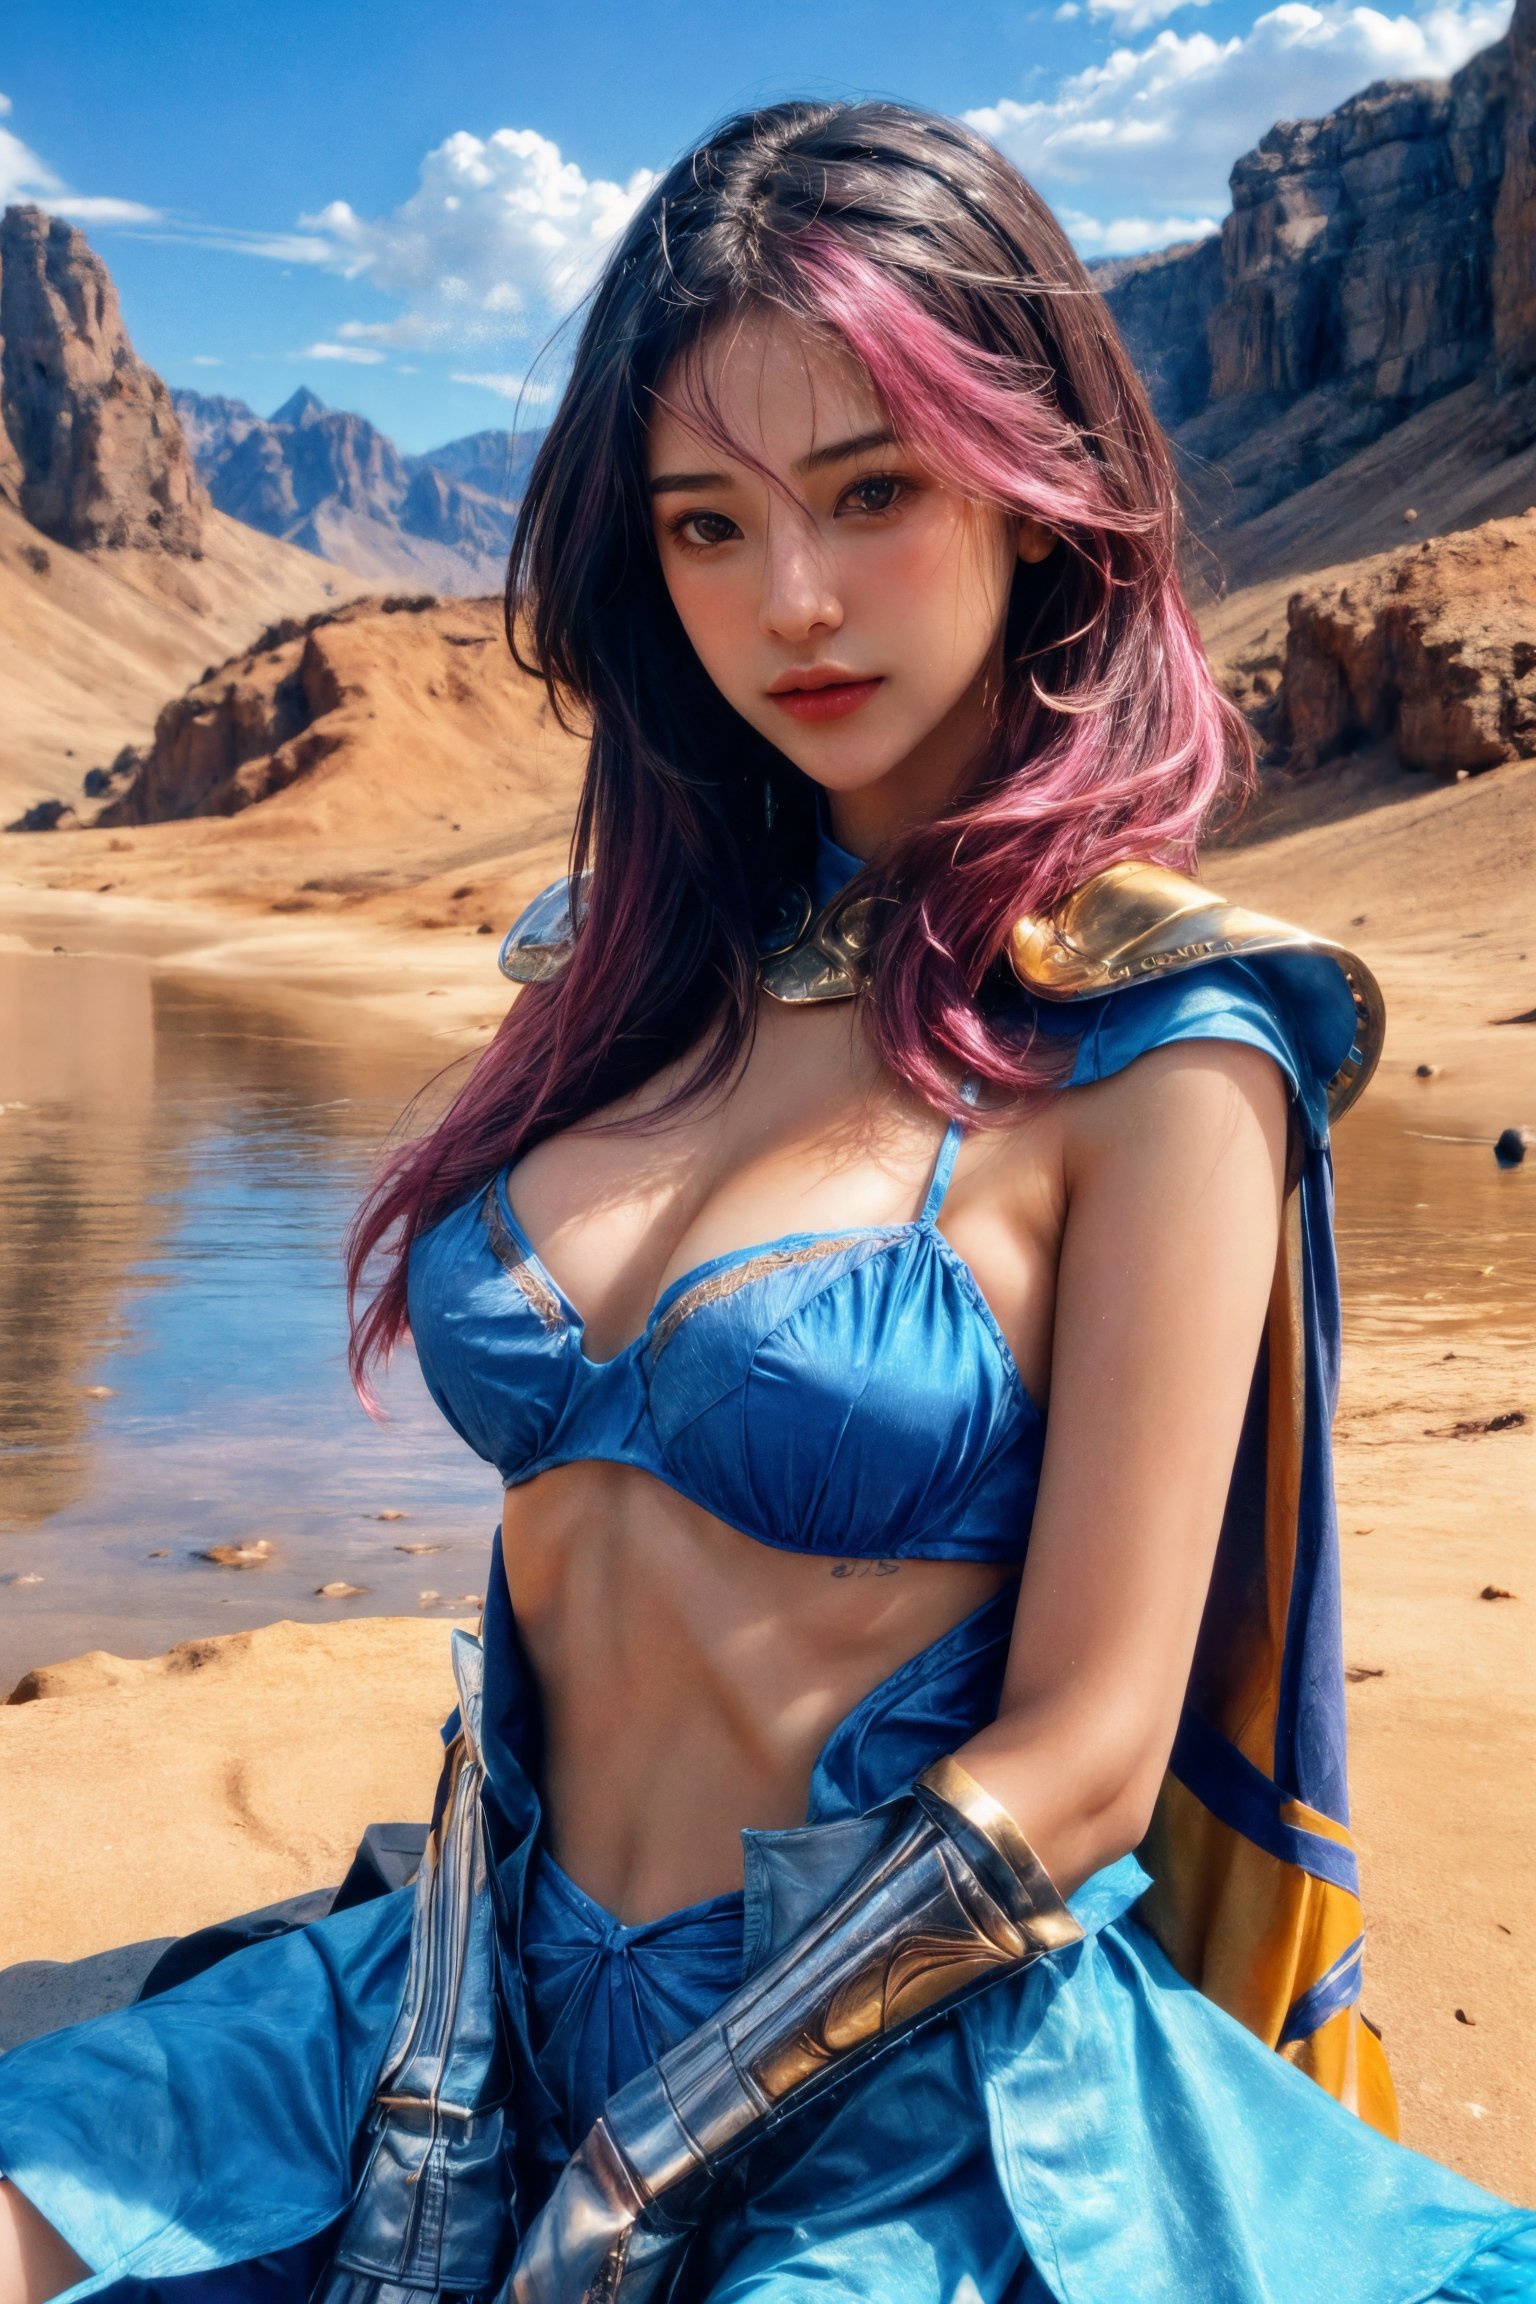 A young woman called chole with long, pink hair stands in a desert landscape( wearing space armored costume:1.2) . She is facing the camera and her arms are slightly raised above her head. Her abdomen is exposed and she has a brassiere on. The sky behind her is bright blue with some wispy clouds scattered throughout. On the ground around her there appears to be sand or dirt, and there is an orange-brown hue to the background of the image. A faint blue light illuminates from just below her chest area, adding an ethereal quality to the photo. Photorealistic, Hyperrealistic, Hyperdetailed, analog style, soft lighting, subsurface scattering, realistic, heavy shadow, masterpiece, best quality, ultra realistic, 8k, golden ratio, Intricate, High Detail, film photography, soft focus
,v4ni4,b3rli,n0t,ti4r4,4nya